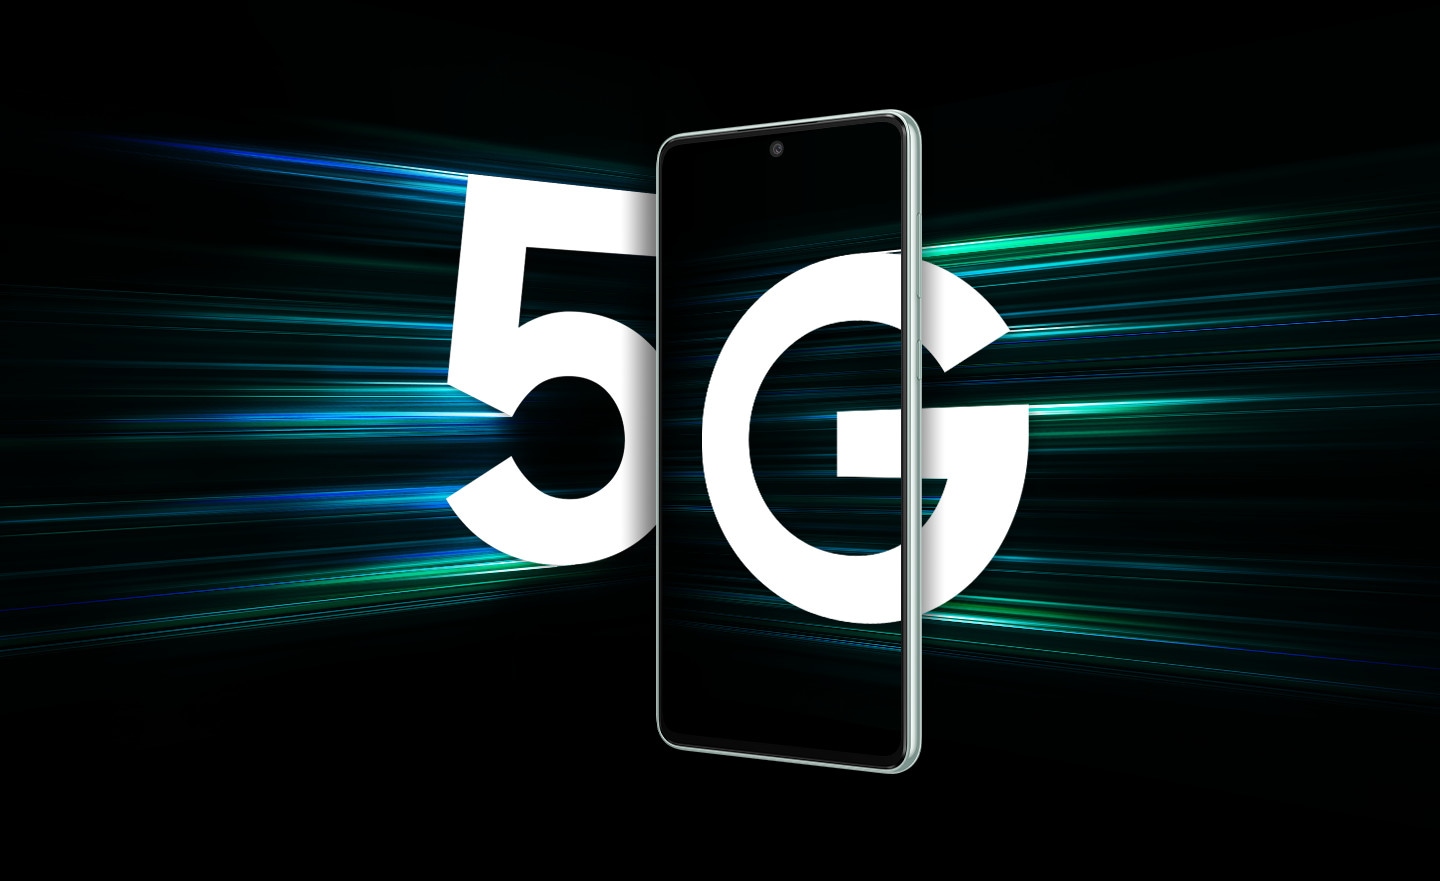 5G network is strongly connected